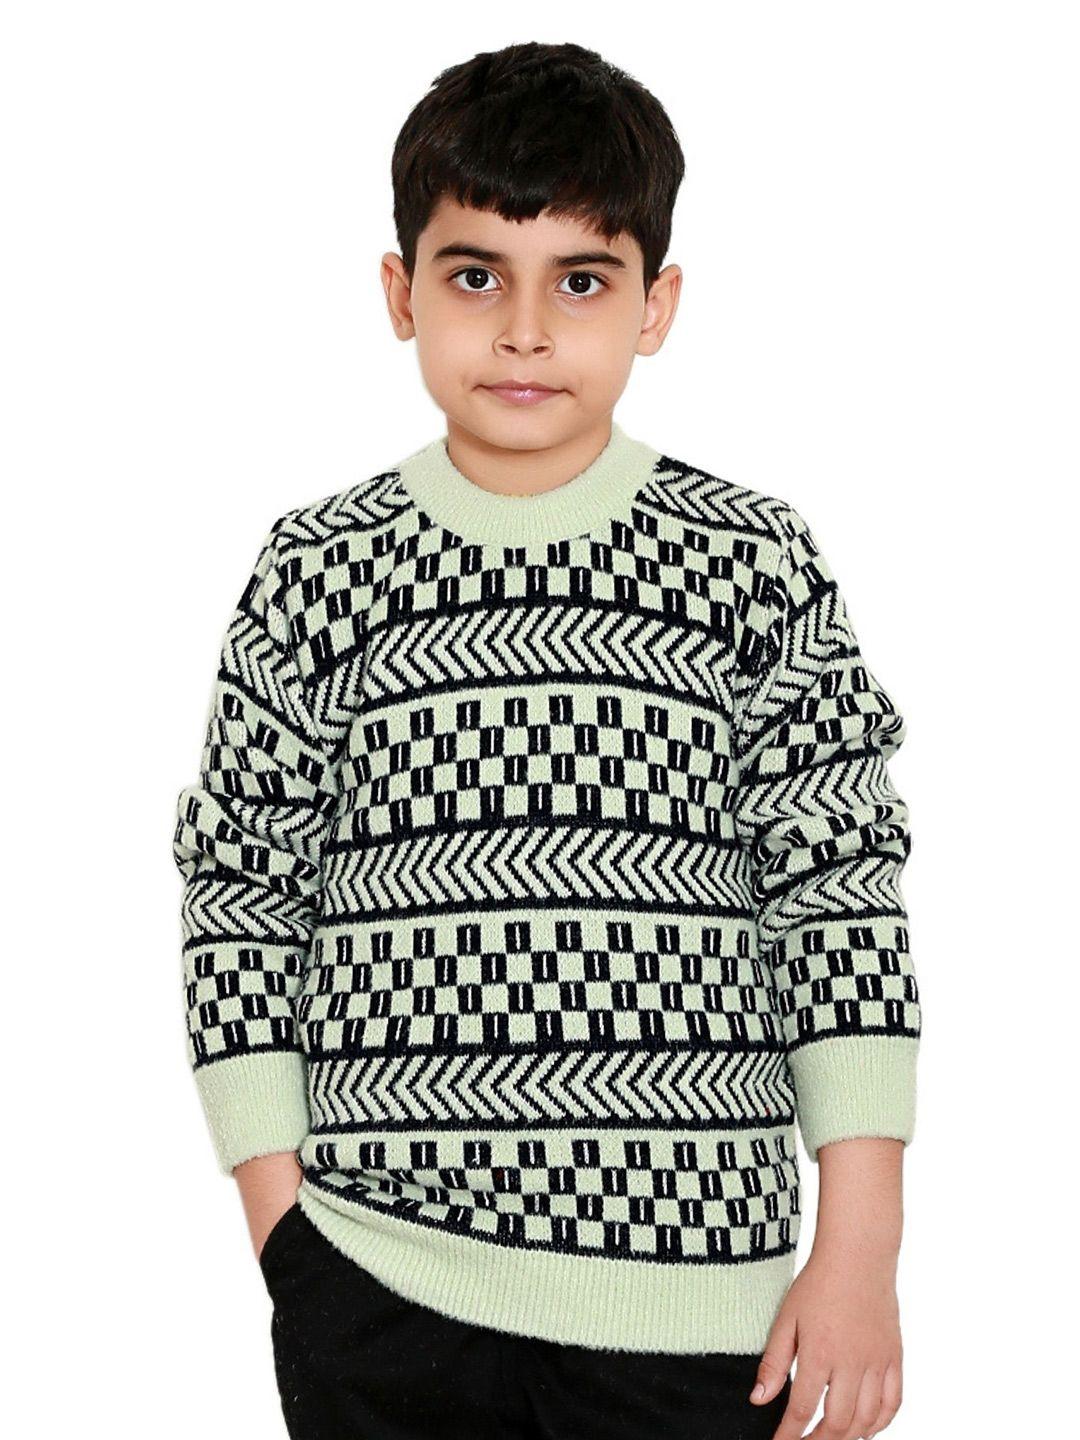 BAESD Boys Geometric Printed Round Neck Long Sleeves Pullover Sweater